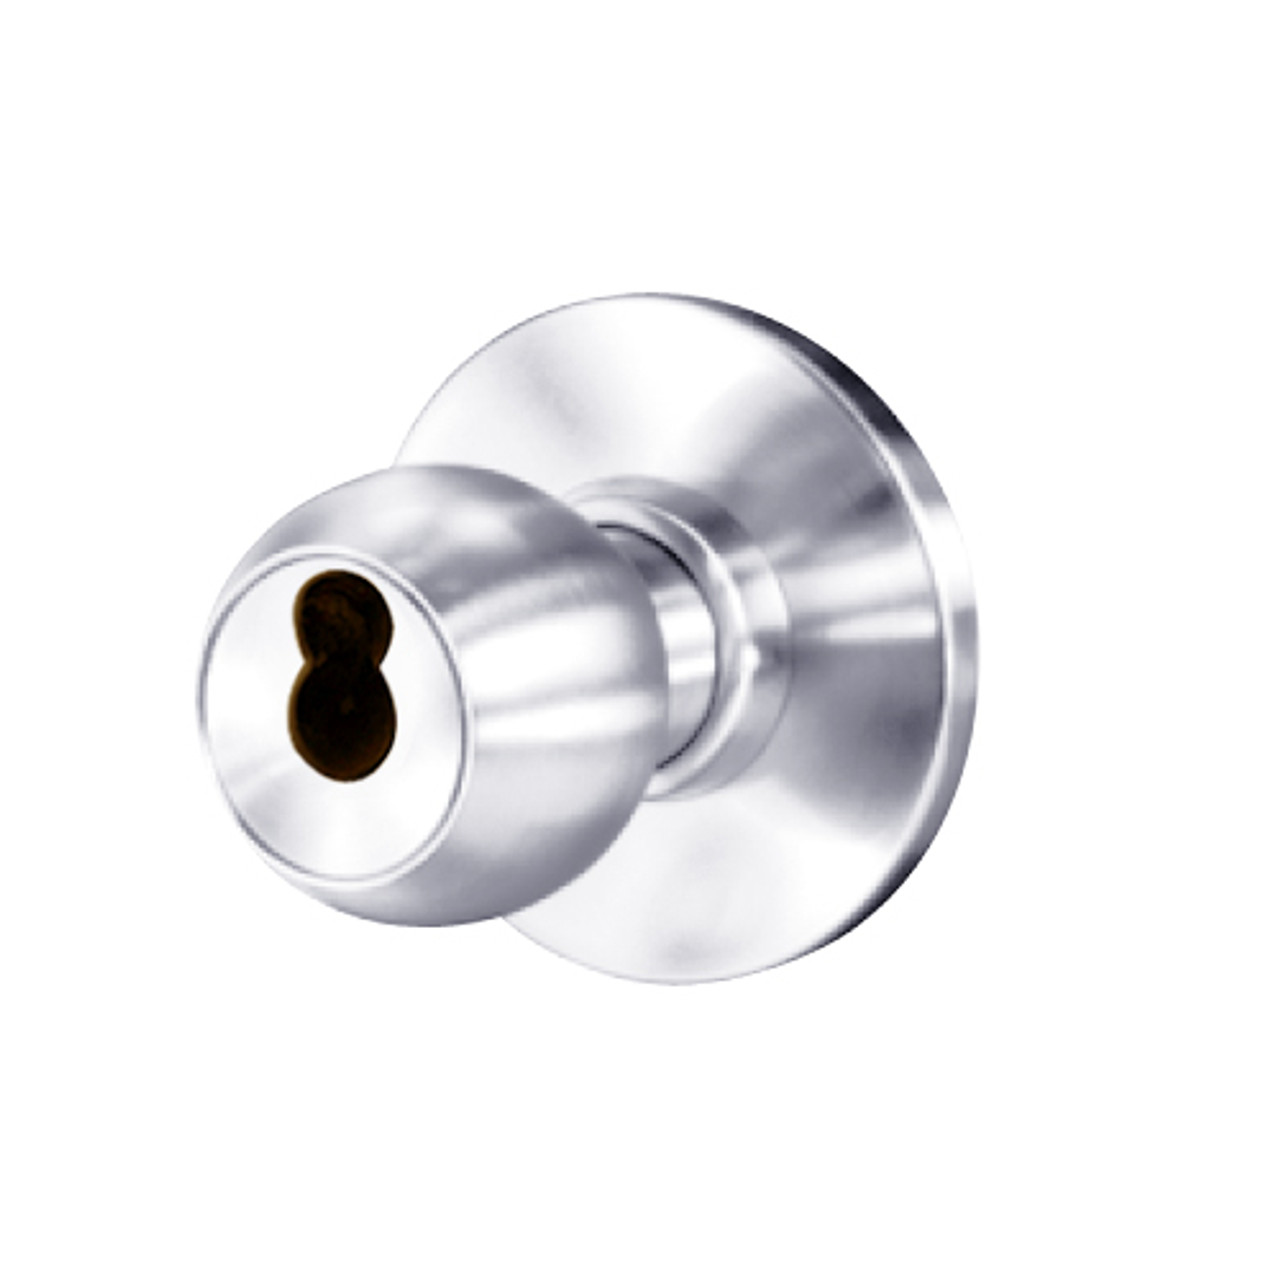 8K37A4AS3625 Best 8K Series Dormitory/Storeroom Heavy Duty Cylindrical Knob Locks with Round Style in Bright Chrome